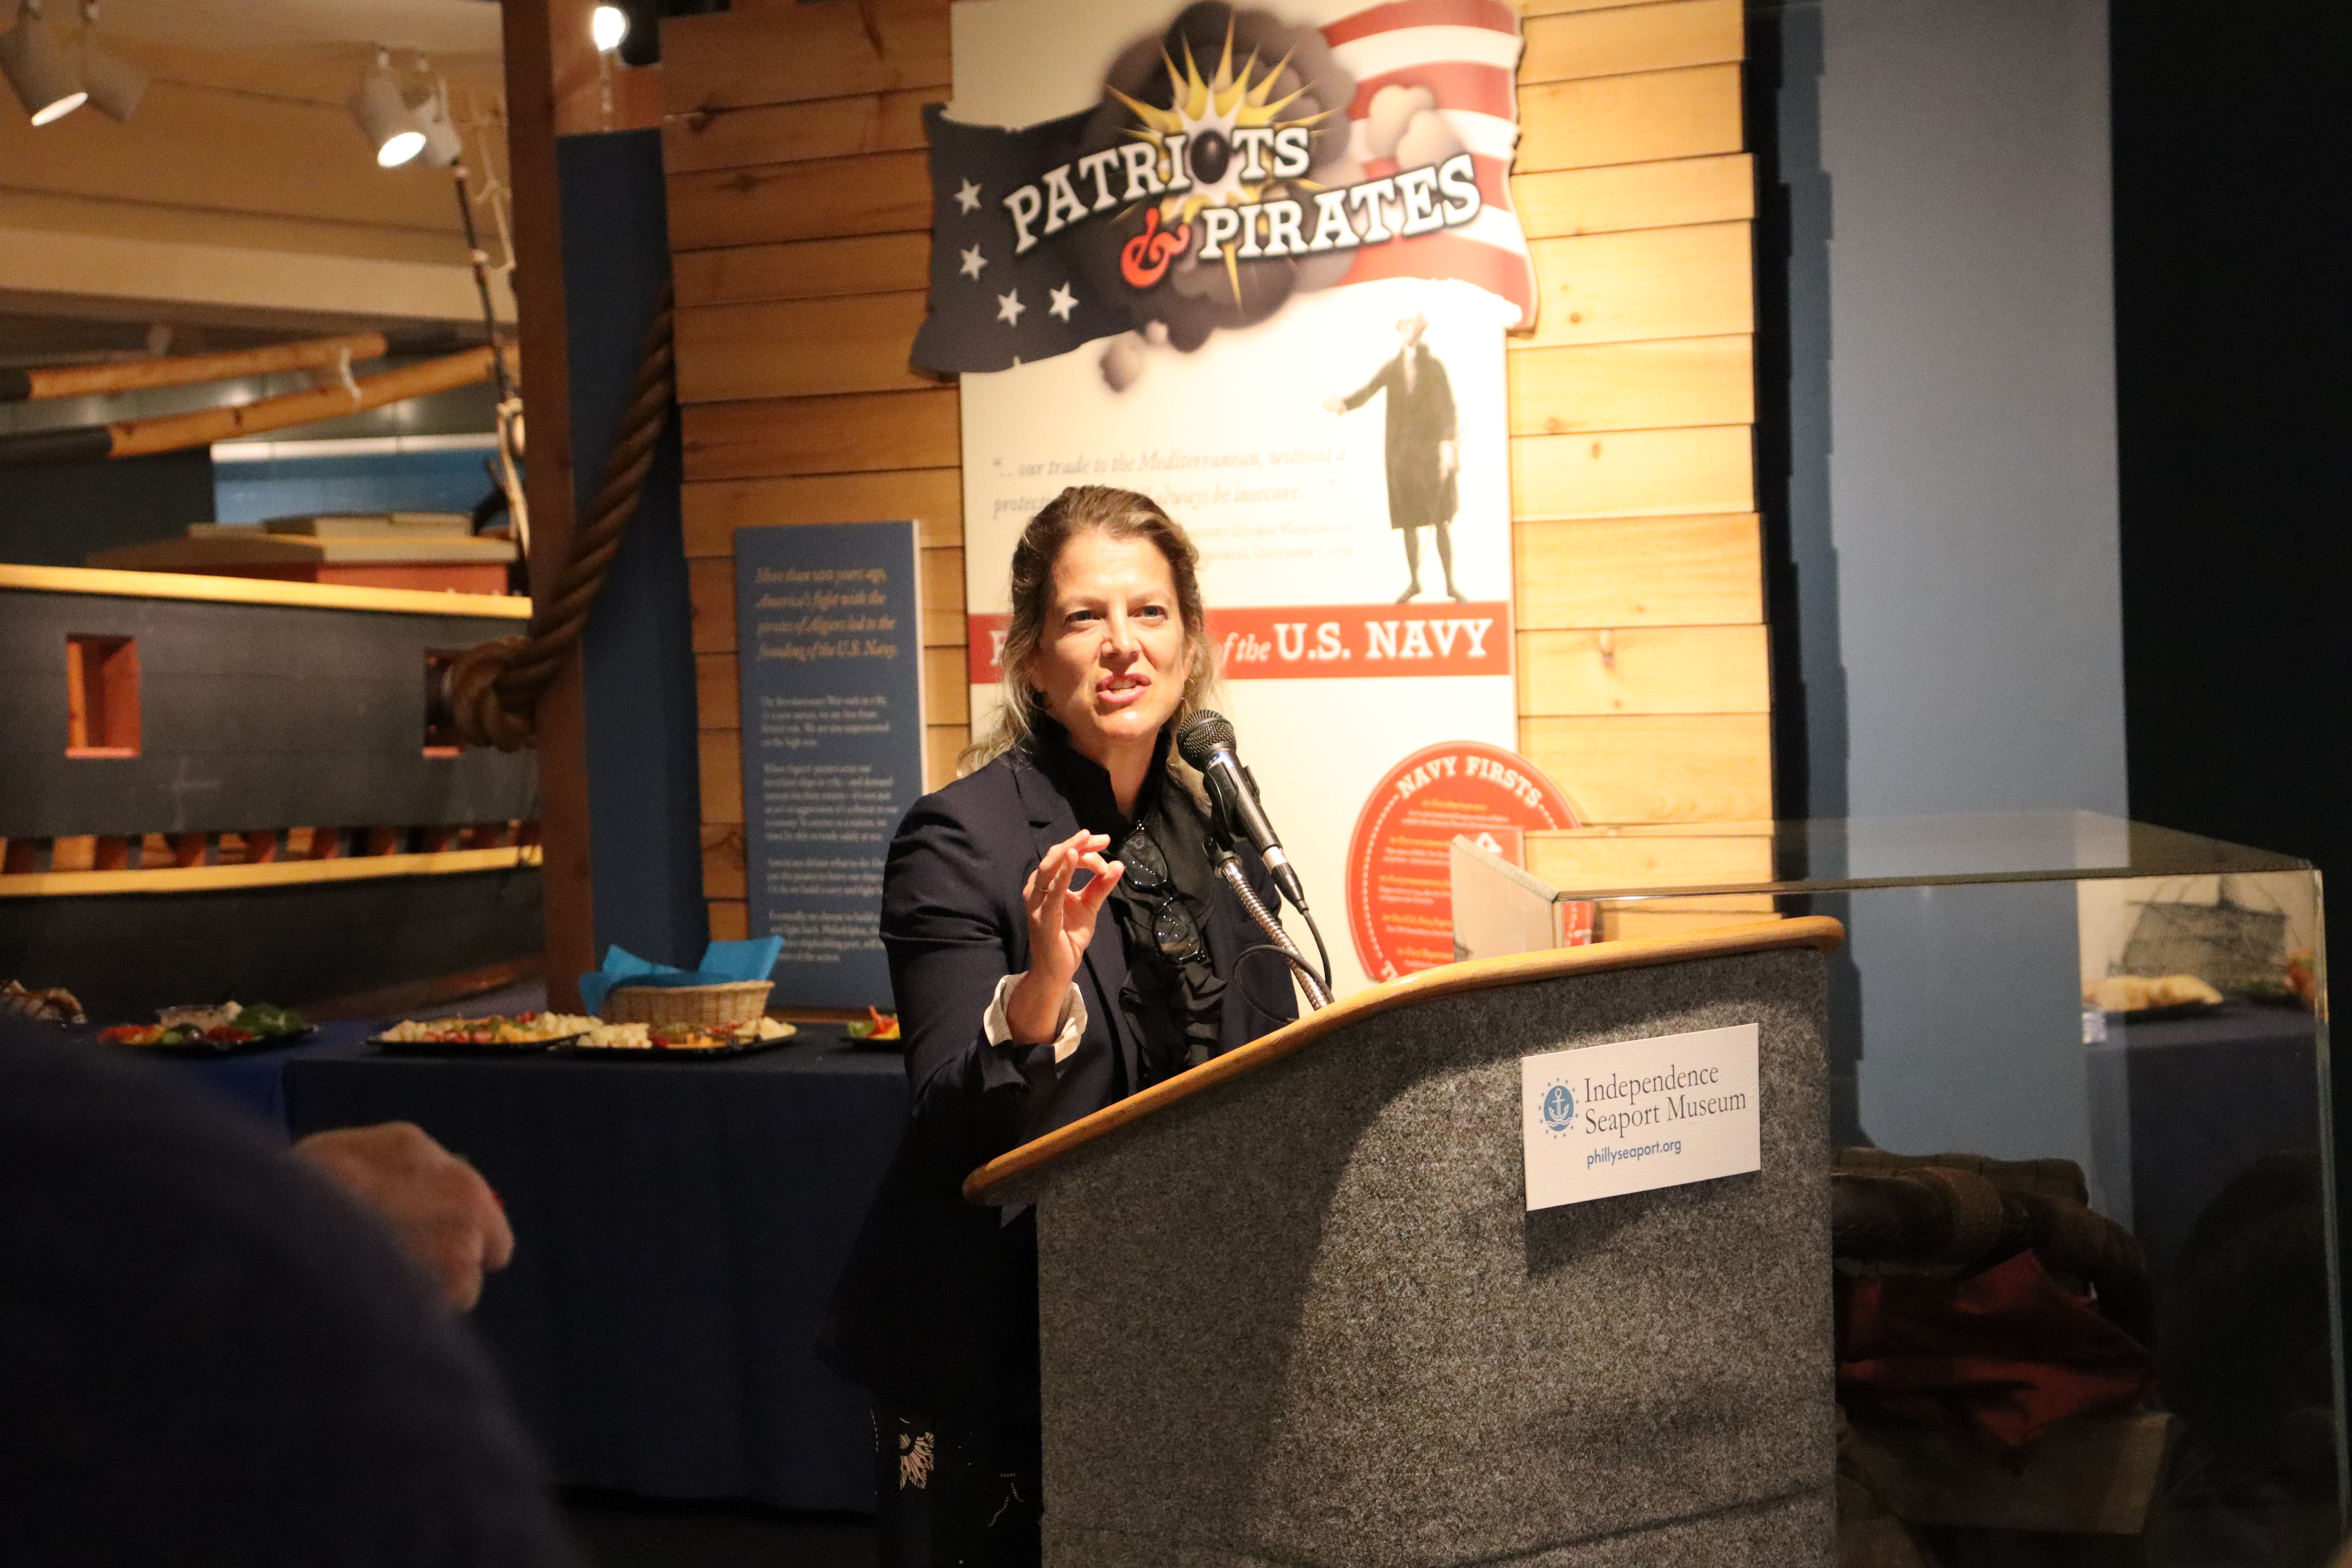 A woman wearing a black blazer with her hair pulled back gives remarks at a podium in a museum gallery.